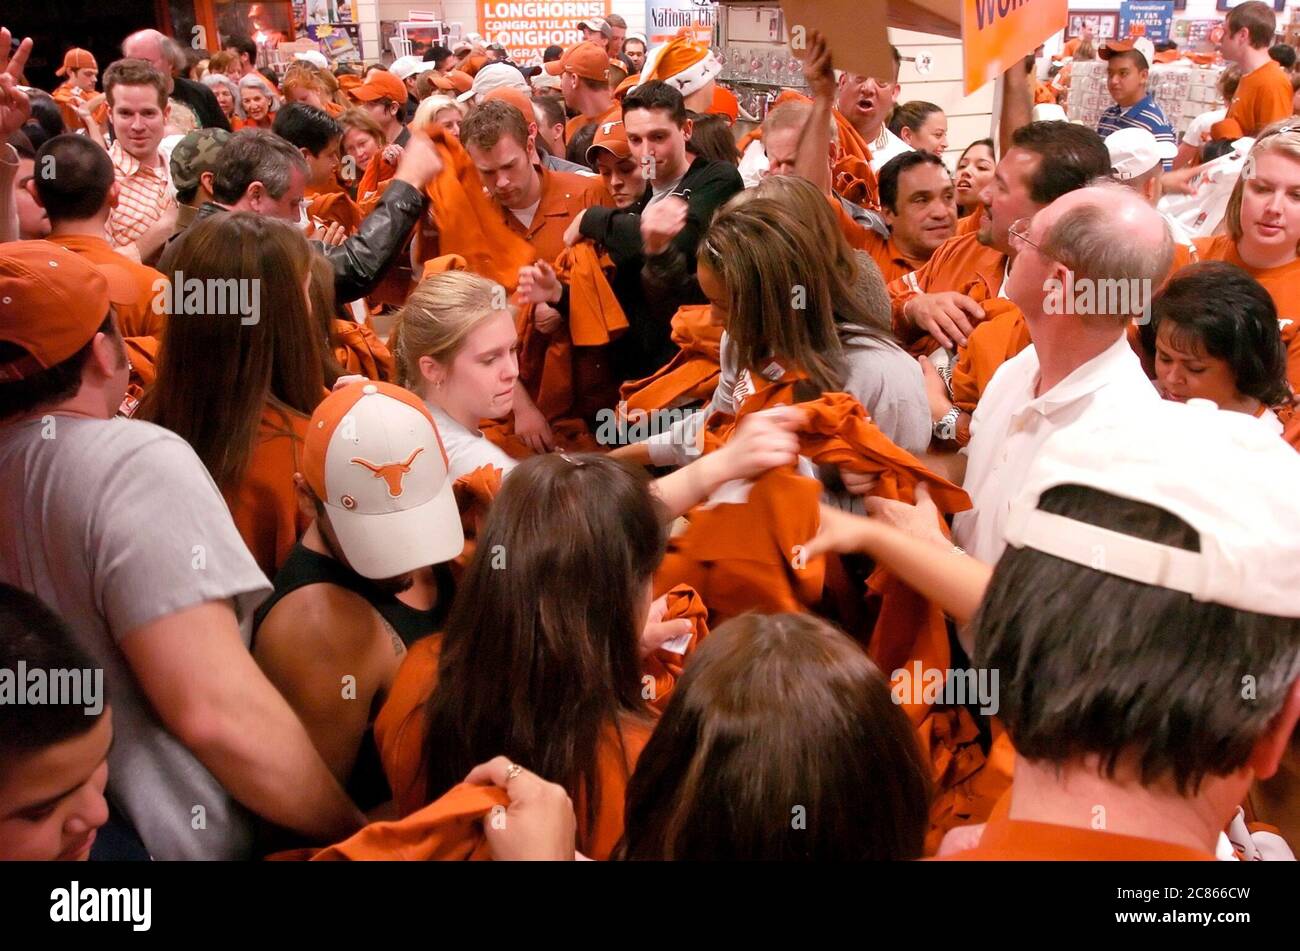 Austin, Texas USA, January 5, 2006: University of Texas football fans pack the University Co-op Bookstore as Longhorn merchandise went on sale commemorating Texas' Rose Bowl victory over USC to win the national championship. ©Bob Daemmrich Stock Photo